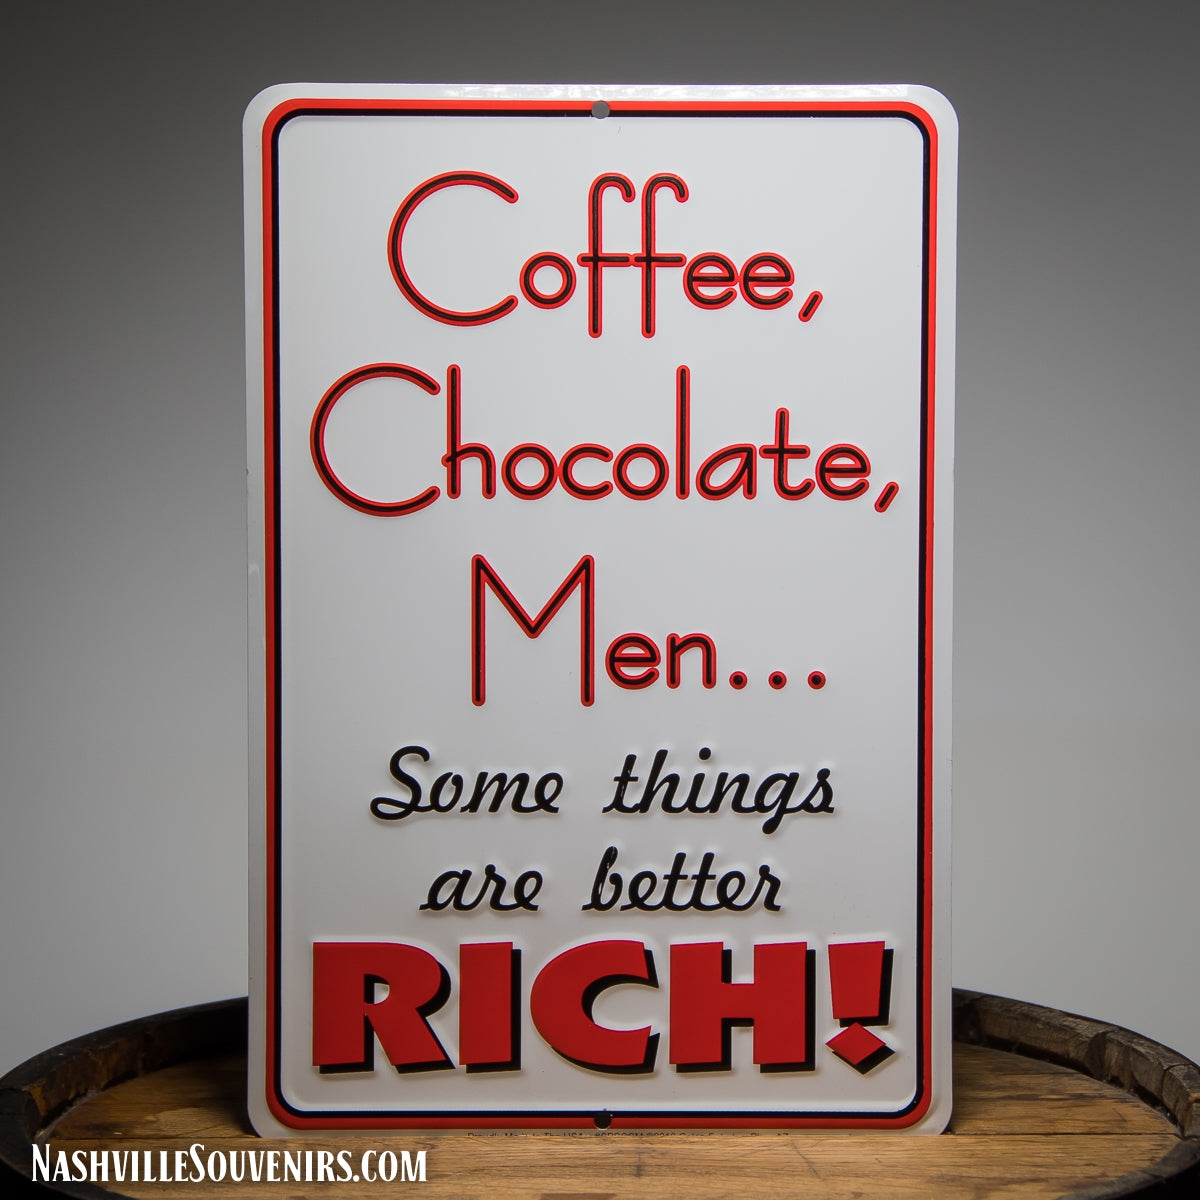 Coffee, Chocolate, Men, Some things are better Rich! Tin Sign